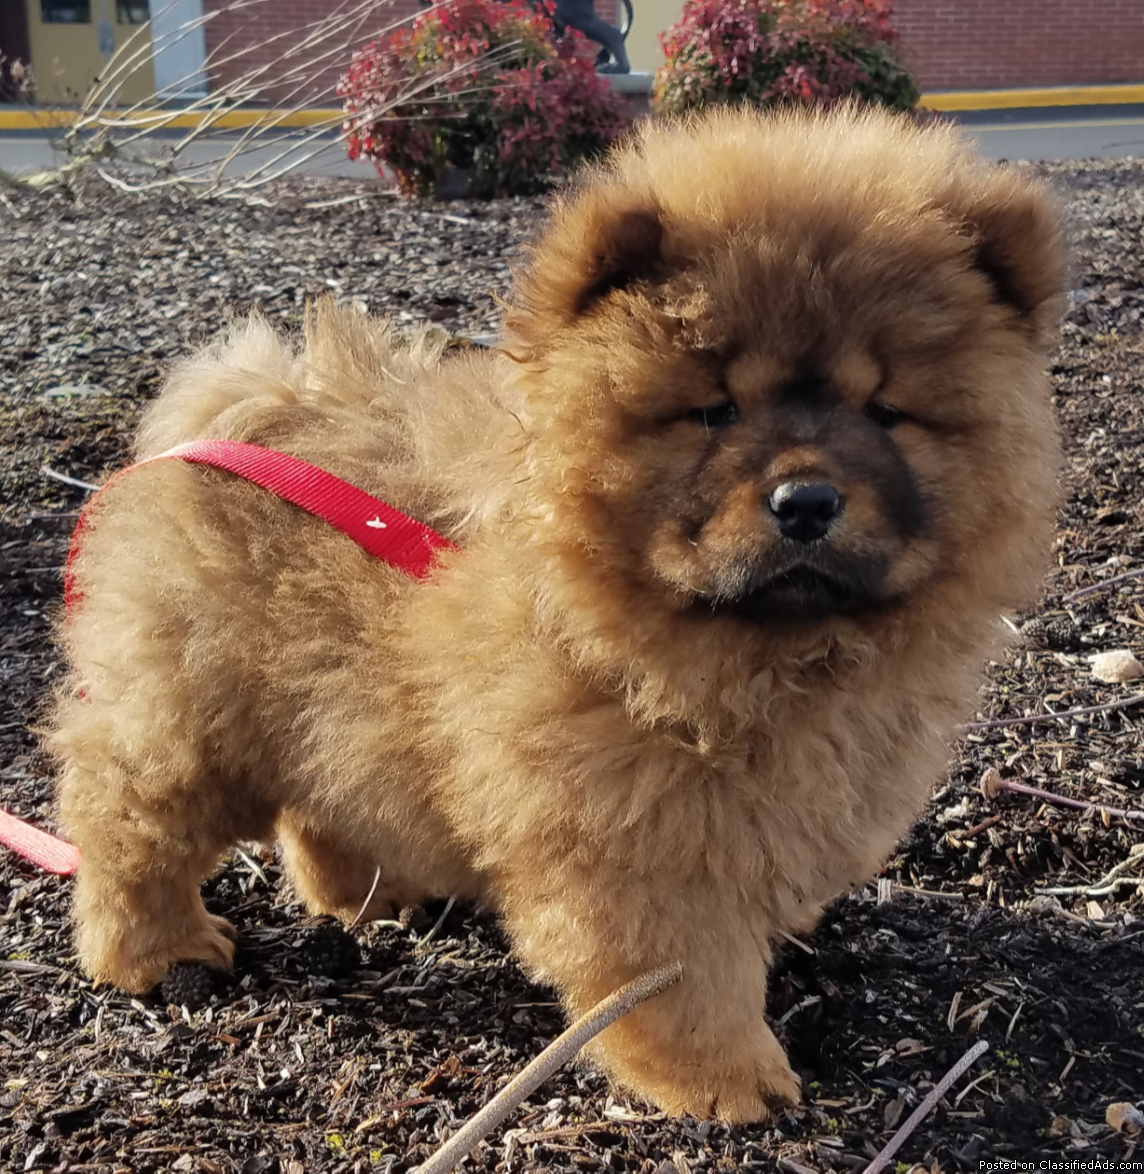 Female Chow Chow puppy